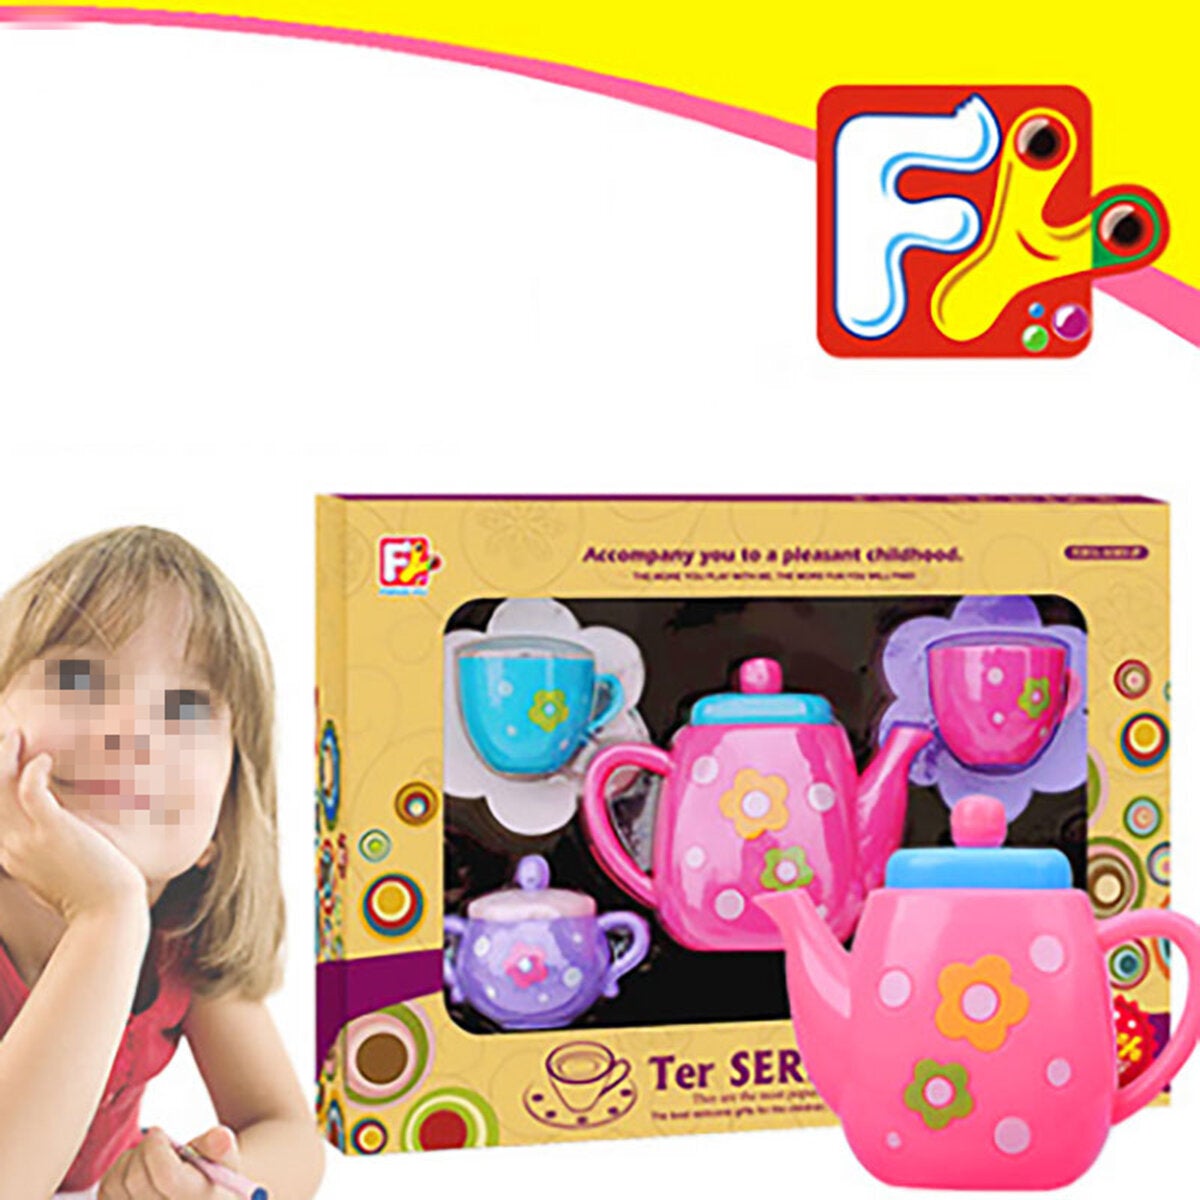 Childrens Simulated Kitchen Flower Teapot Play House Game Indoor Toys